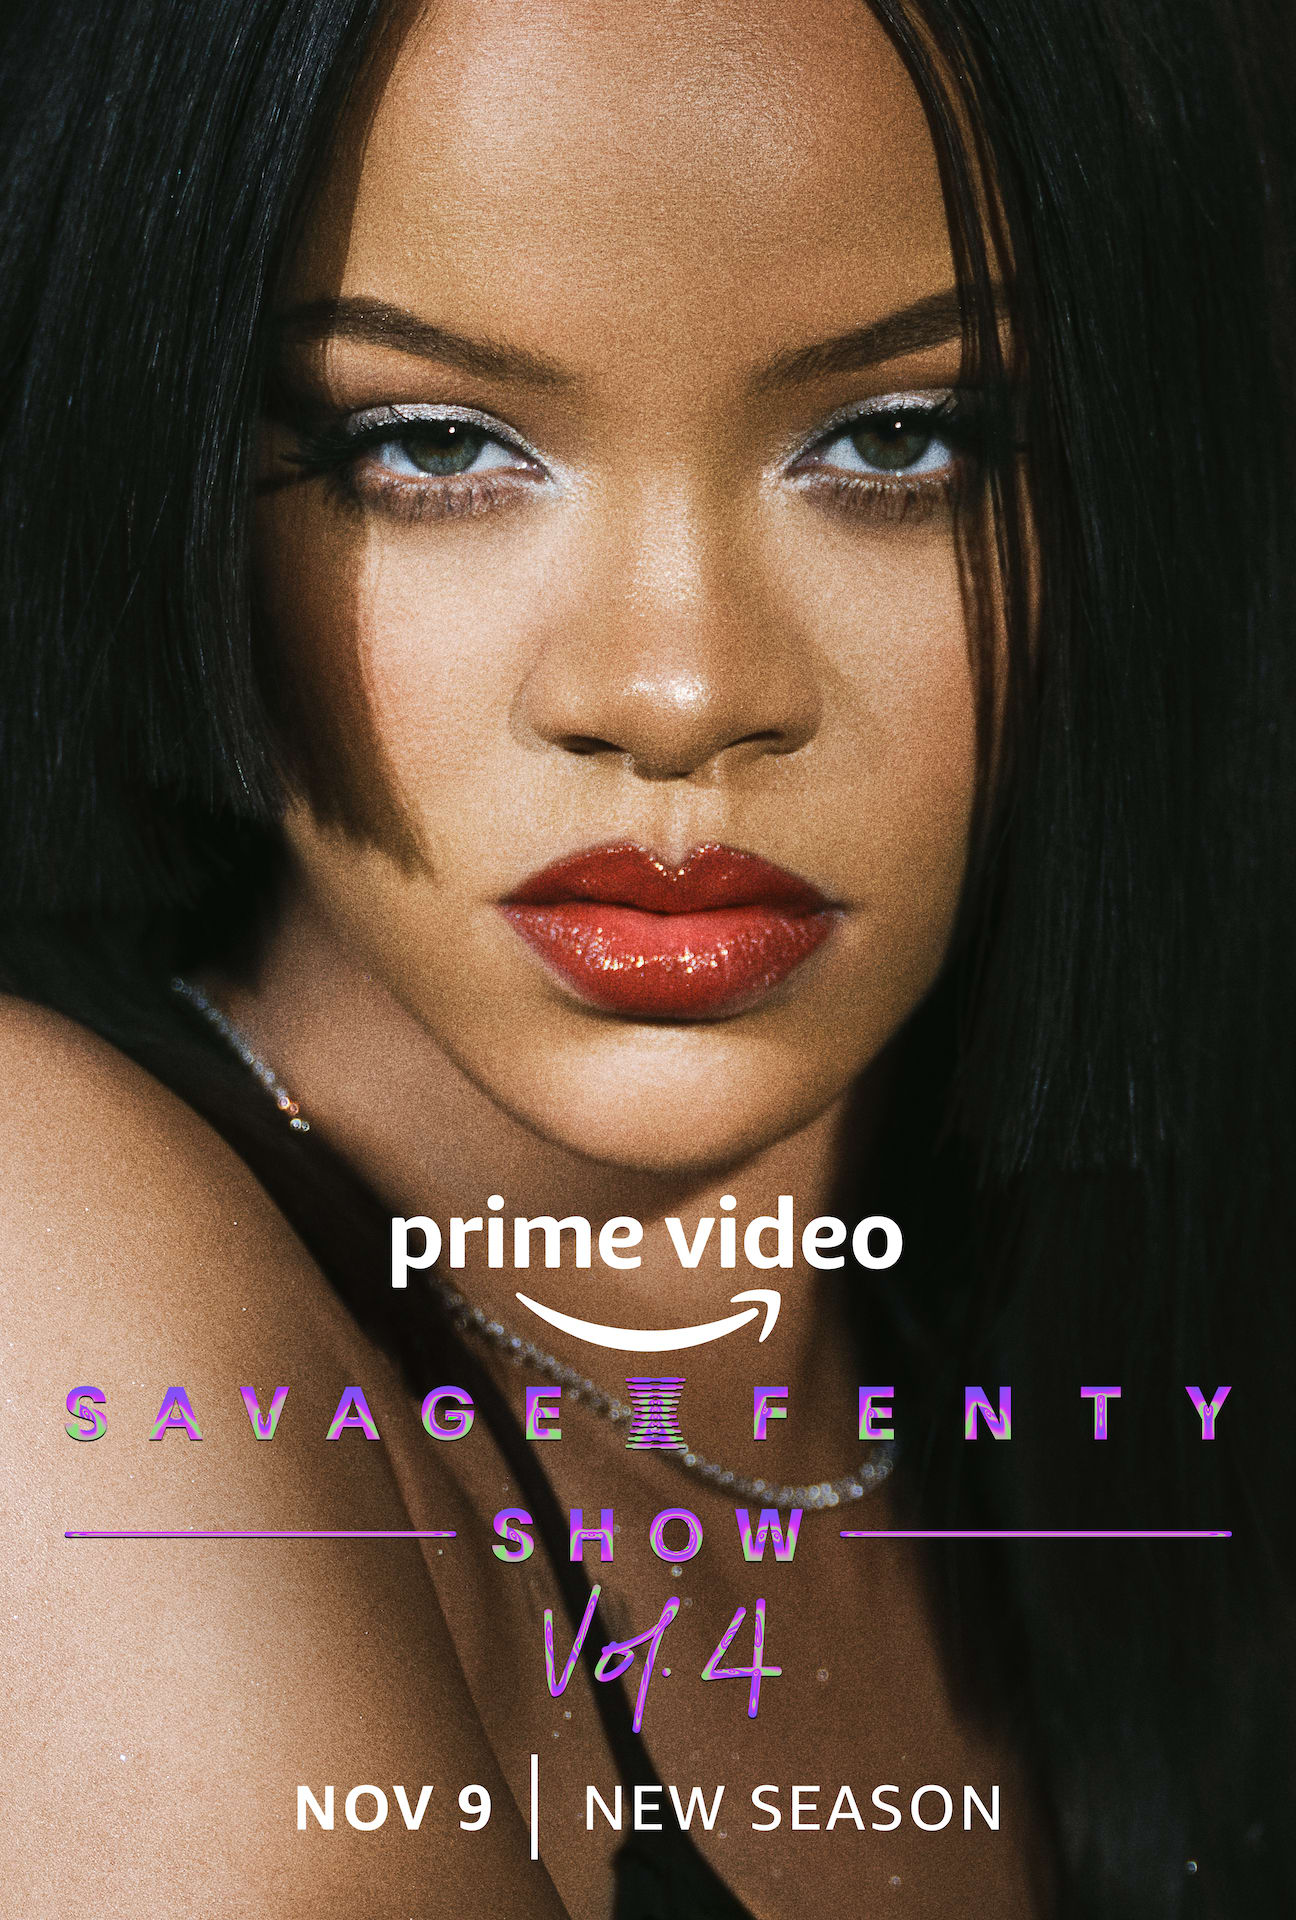 Image from Savage X Fenty 4 show